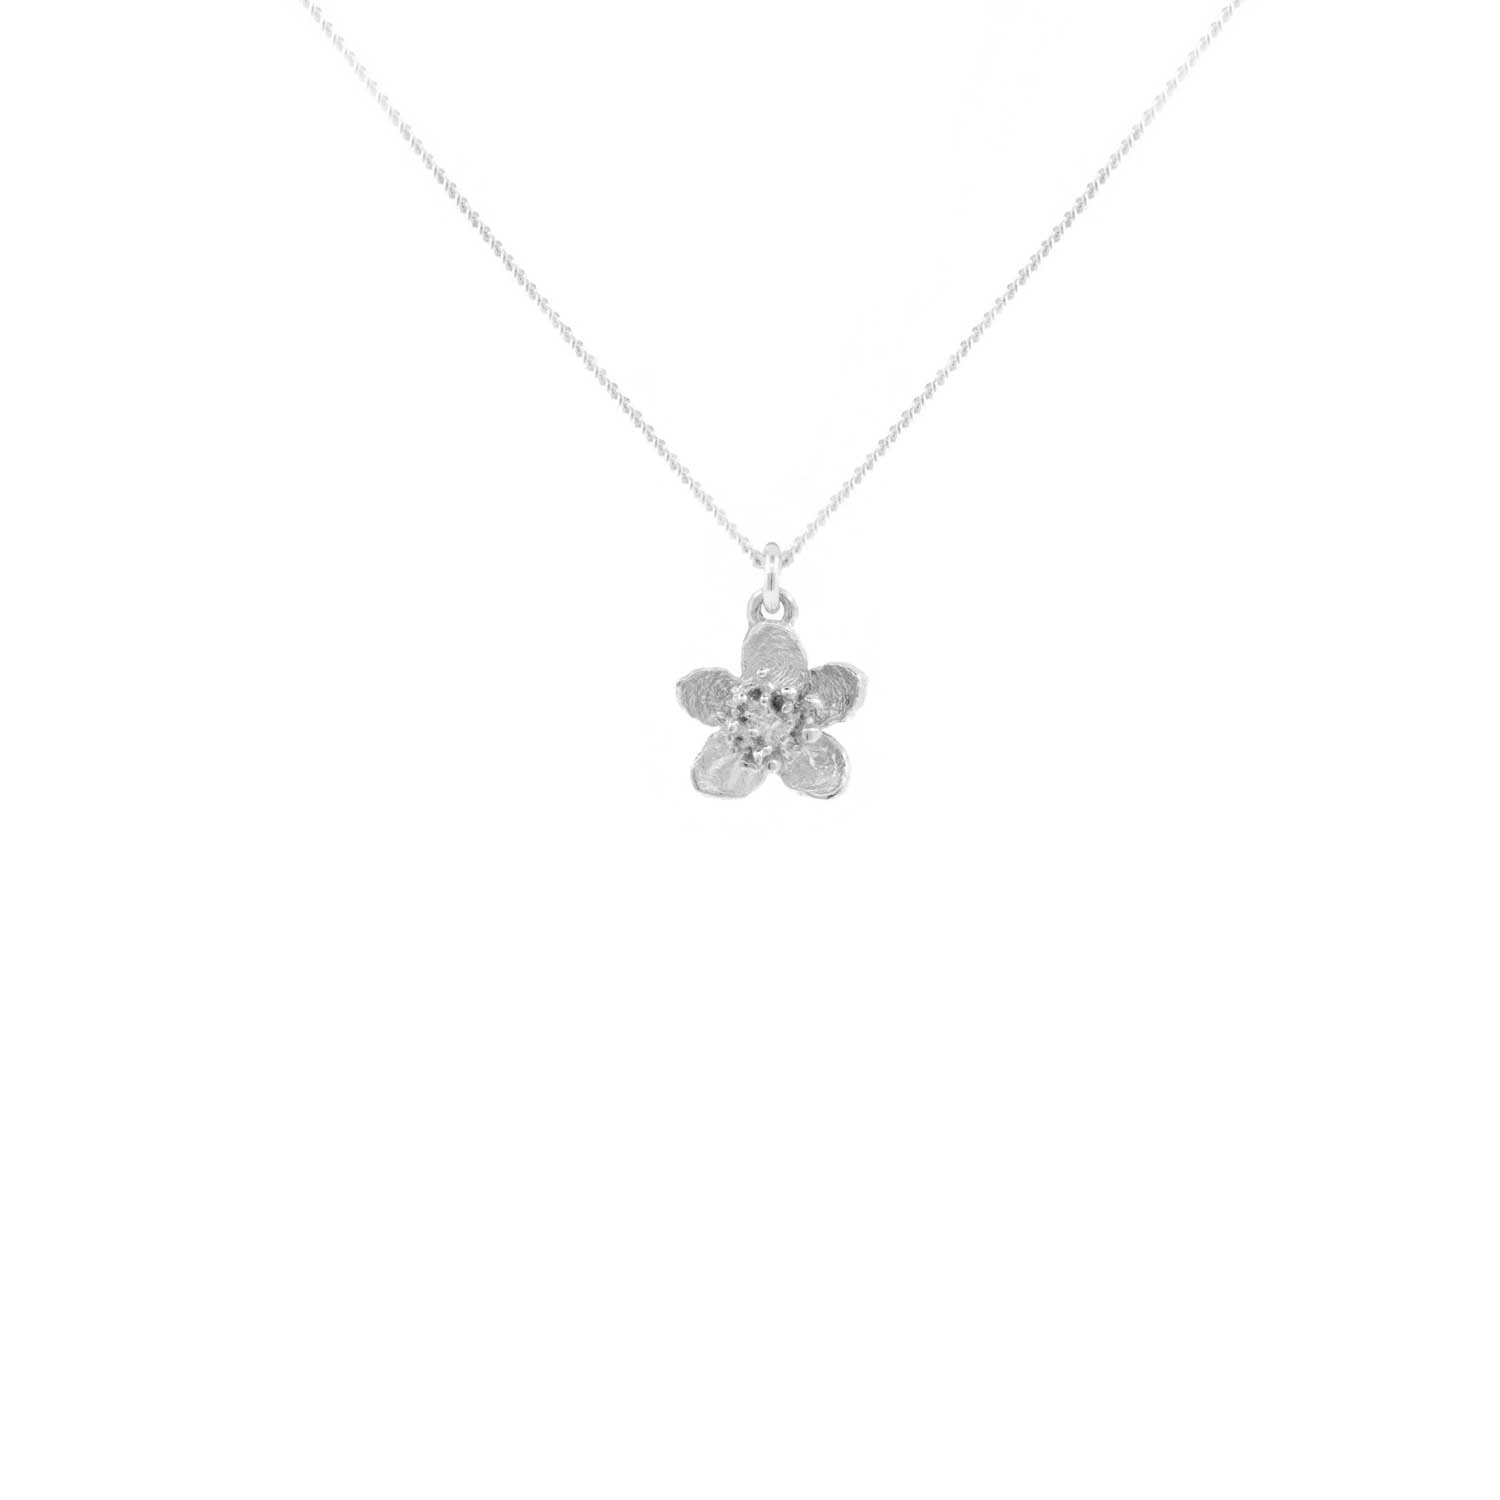 Lee Renee - Cherry Blossom Necklace - Silver